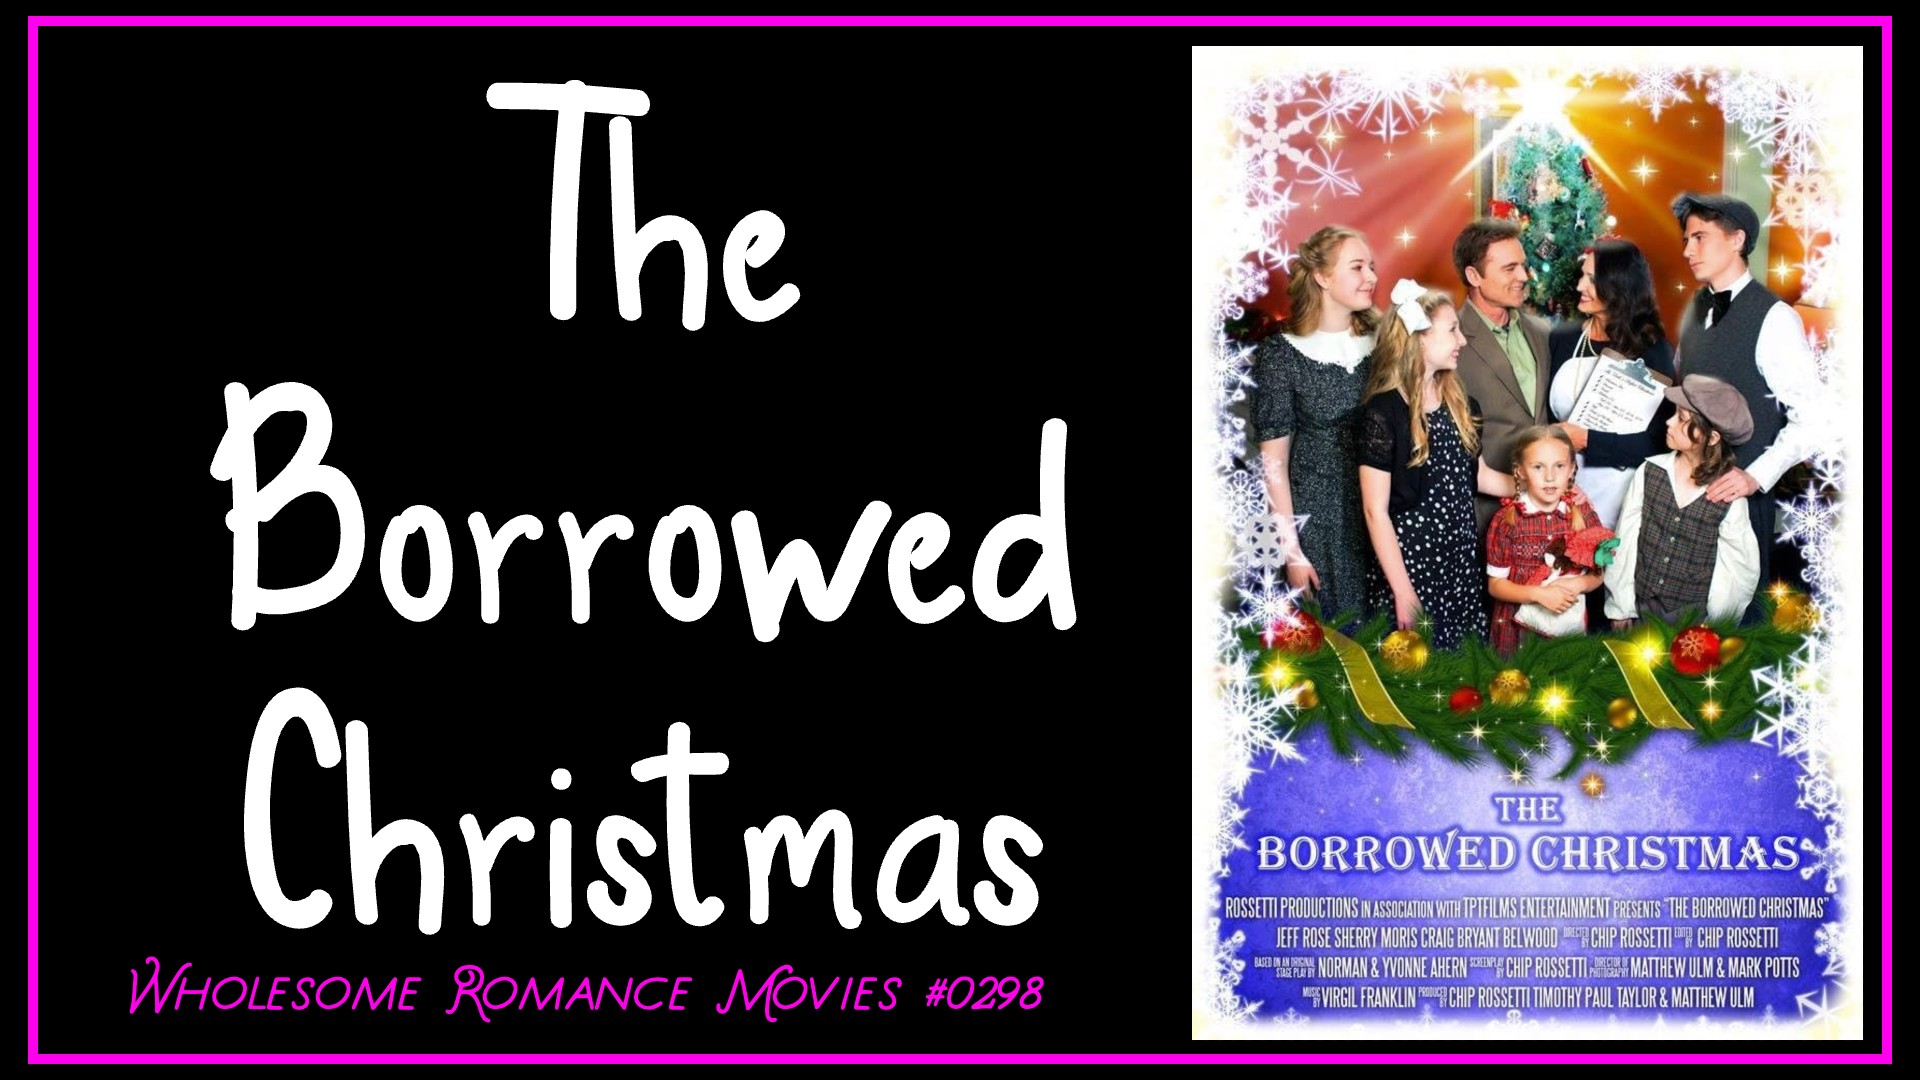 The Borrowed Christmas (2014) WRM Review